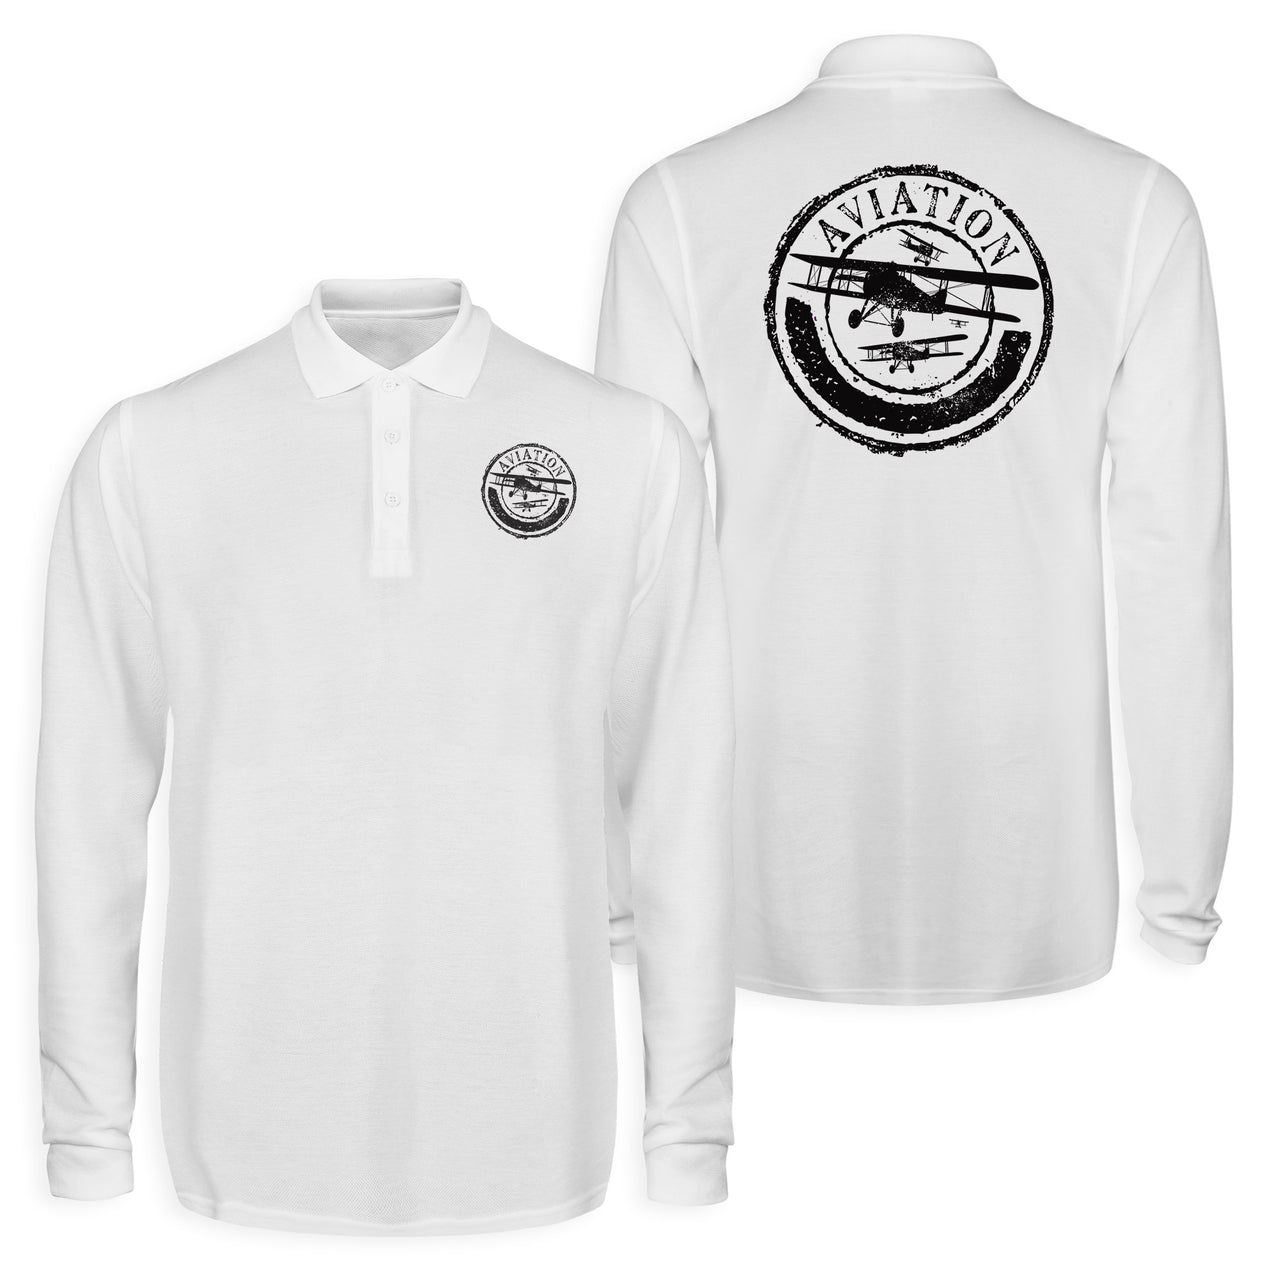 Aviation Lovers Designed Long Sleeve Polo T-Shirts (Double-Side)